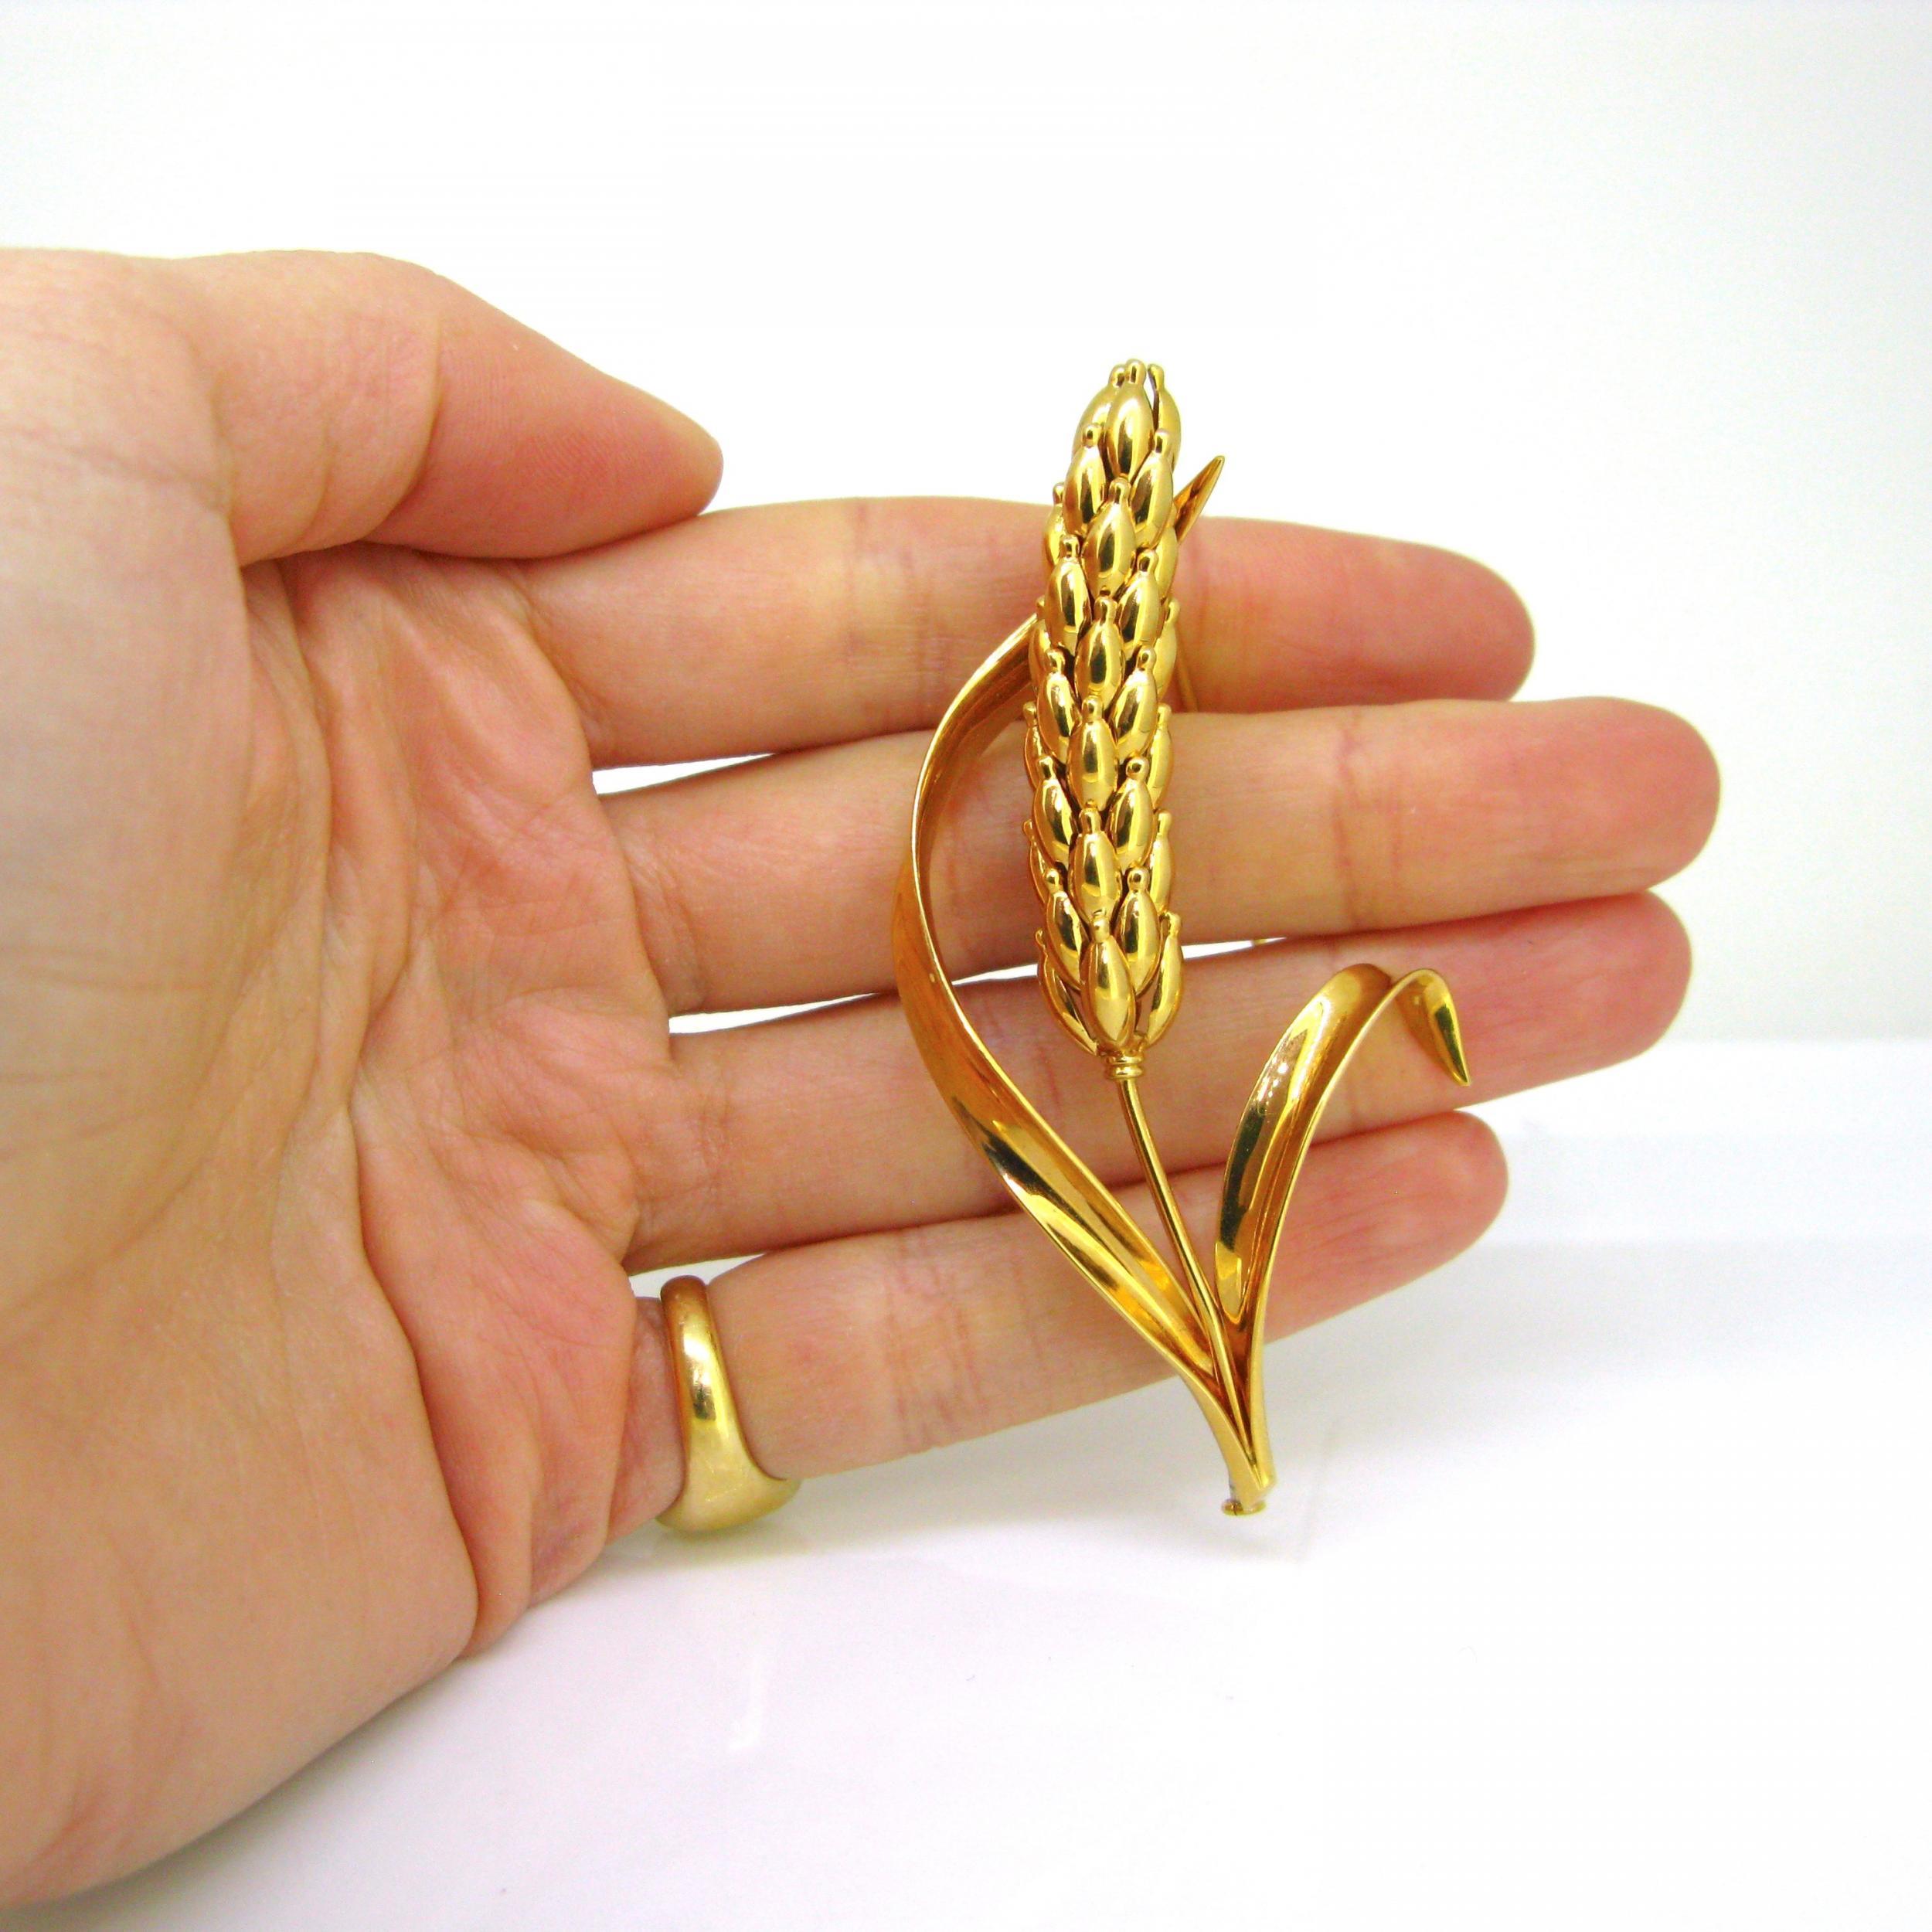 Retro Sheaf of Wheat Pin Brooch by Bettetini, 18kt Yellow Gold, France, circa 19 1